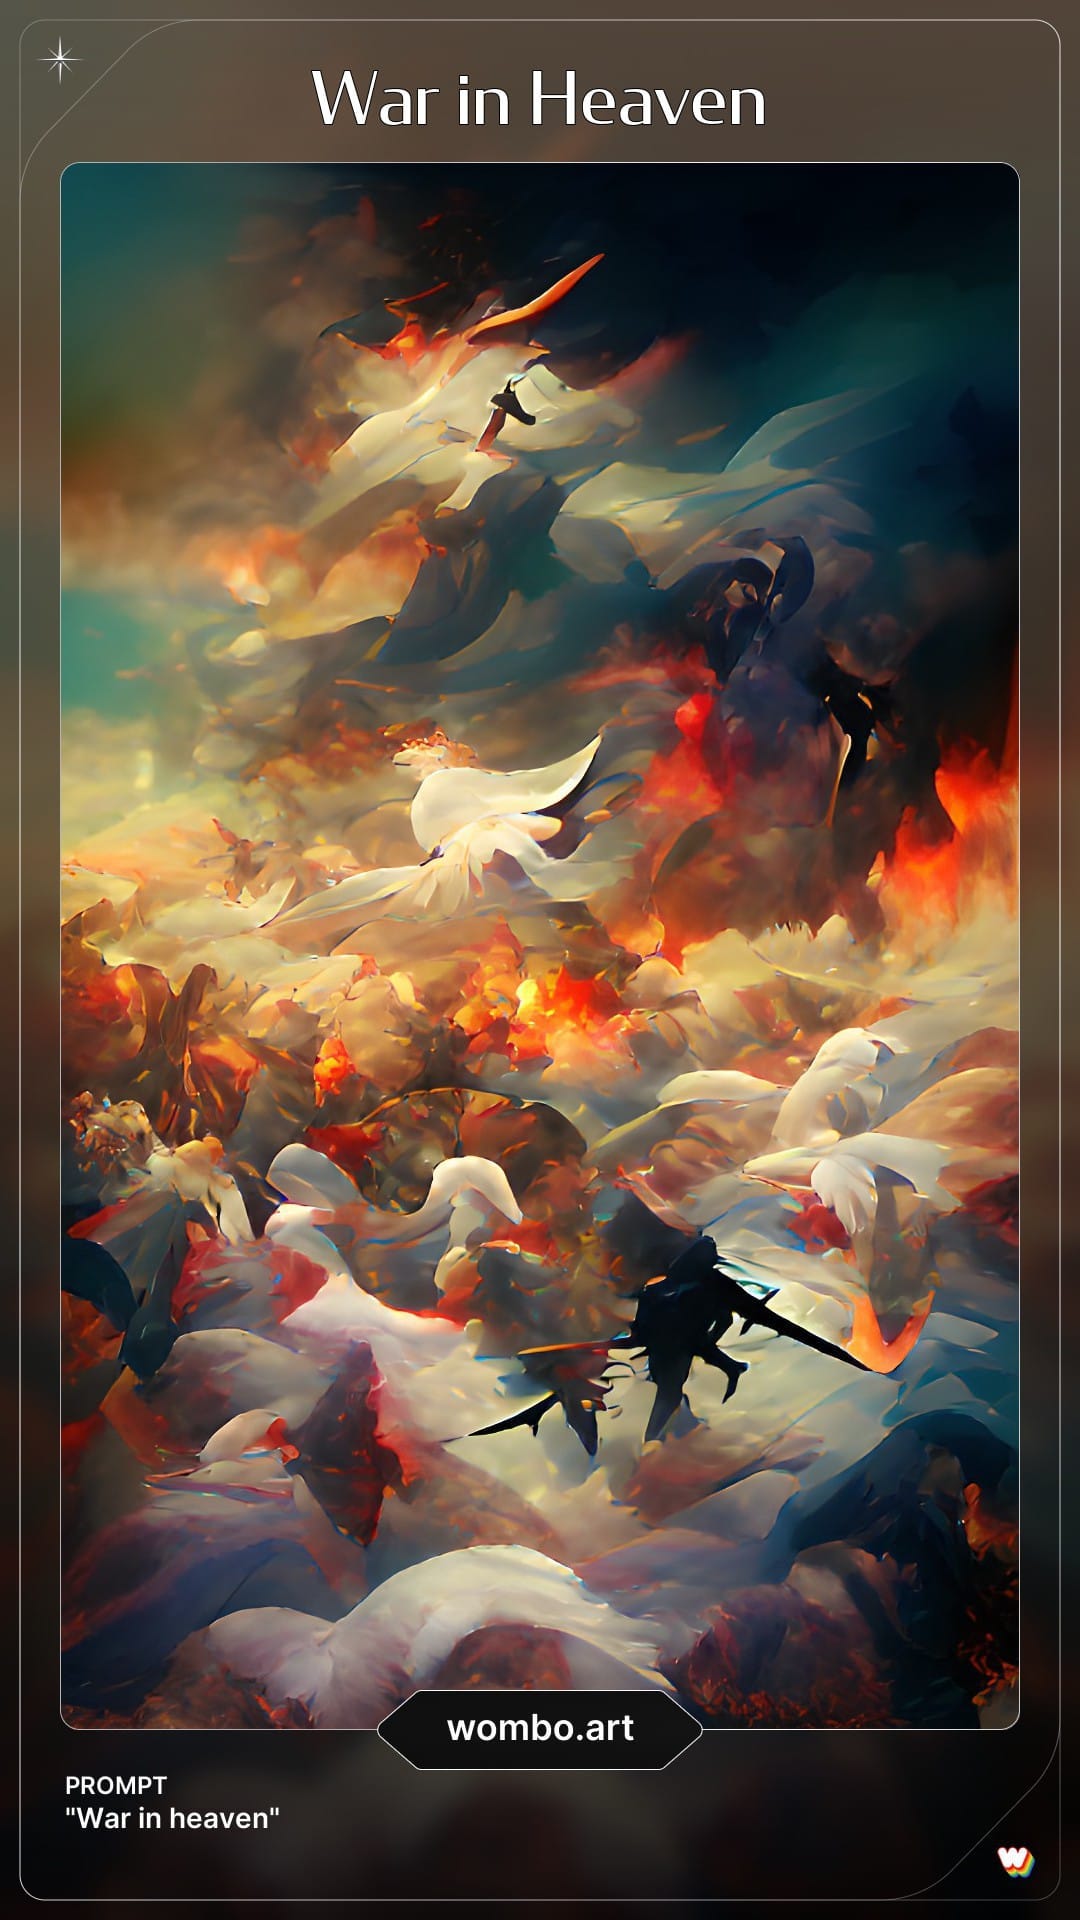 May be an anime-style image of cloud and text that says 'War in Heaven PROMPT "War ".heaven" in heaven" wombo.art'